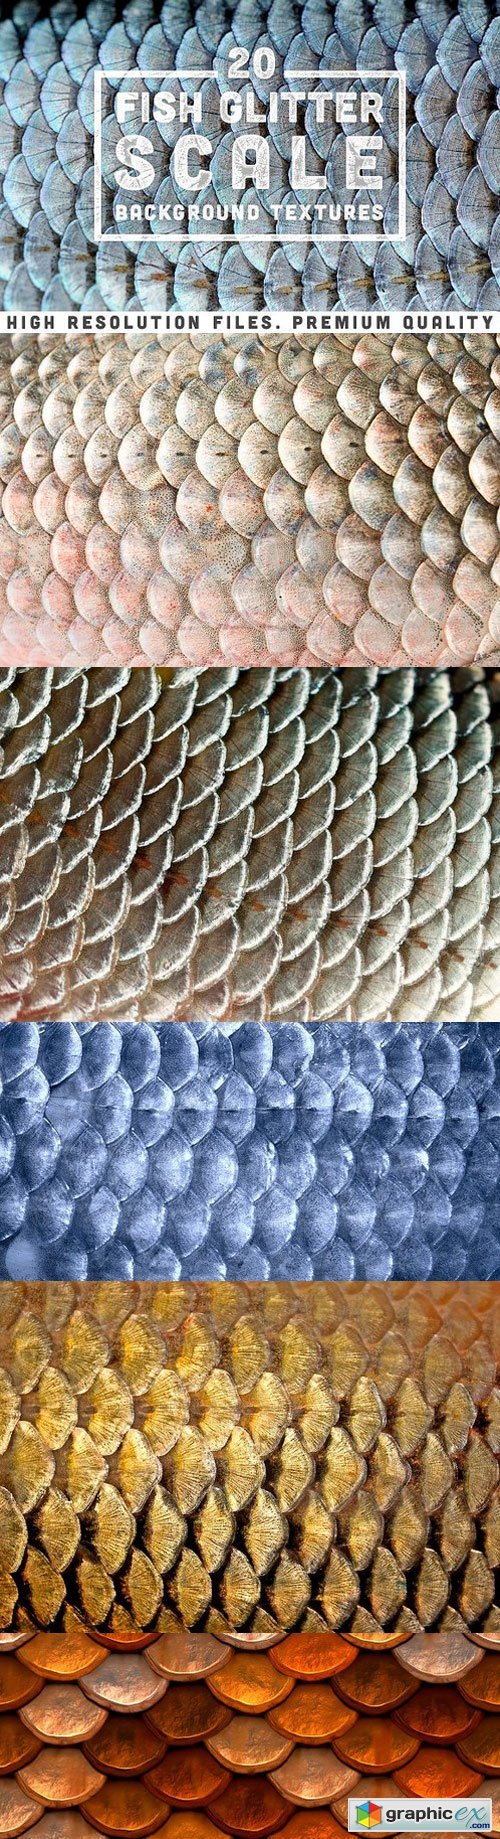 20 Fish Glitter Scale Textures